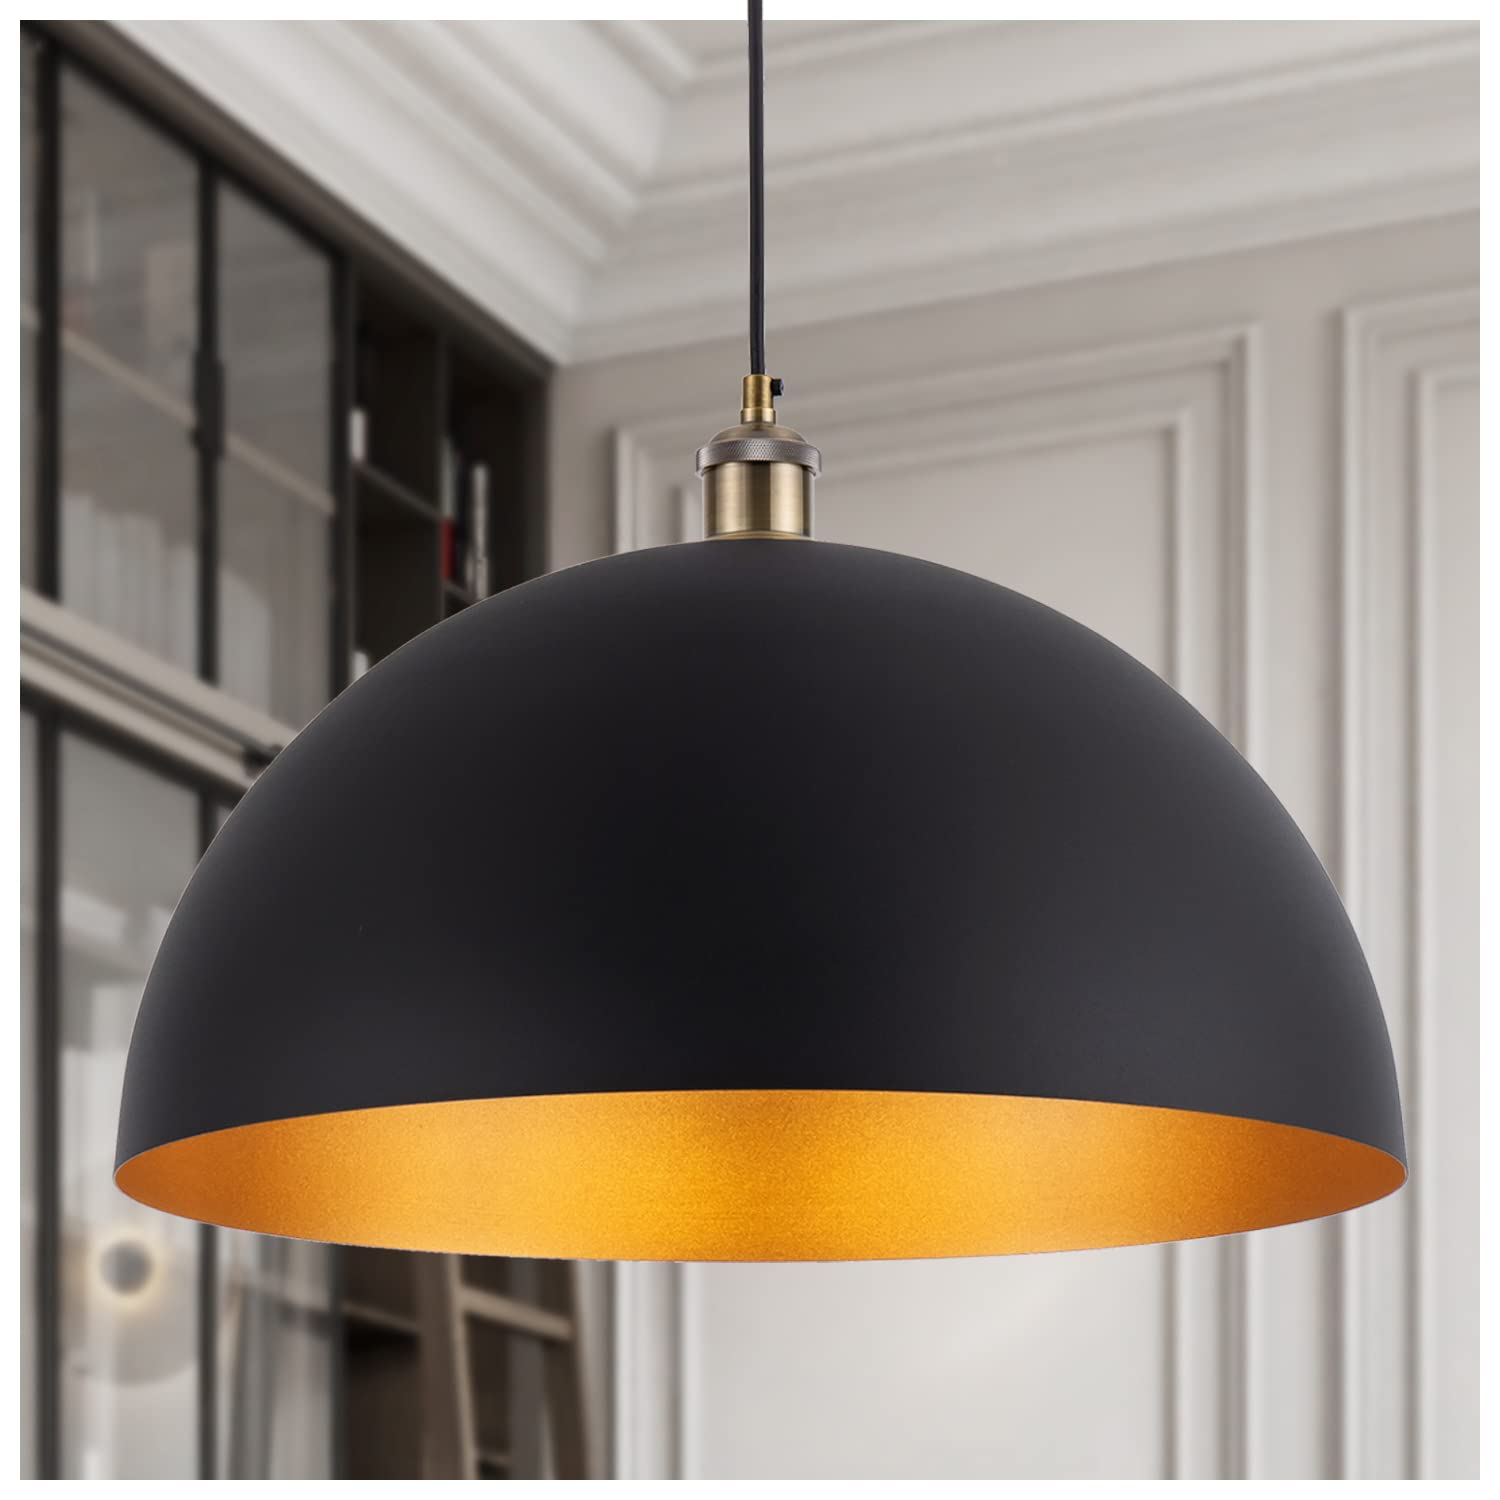 YHANFENgcY Vintage Pendant Light 1772AA Farmhouse Pendant Lights Industrial Large Dome chandelier Black and gold Finish Lighting Fixture Wi